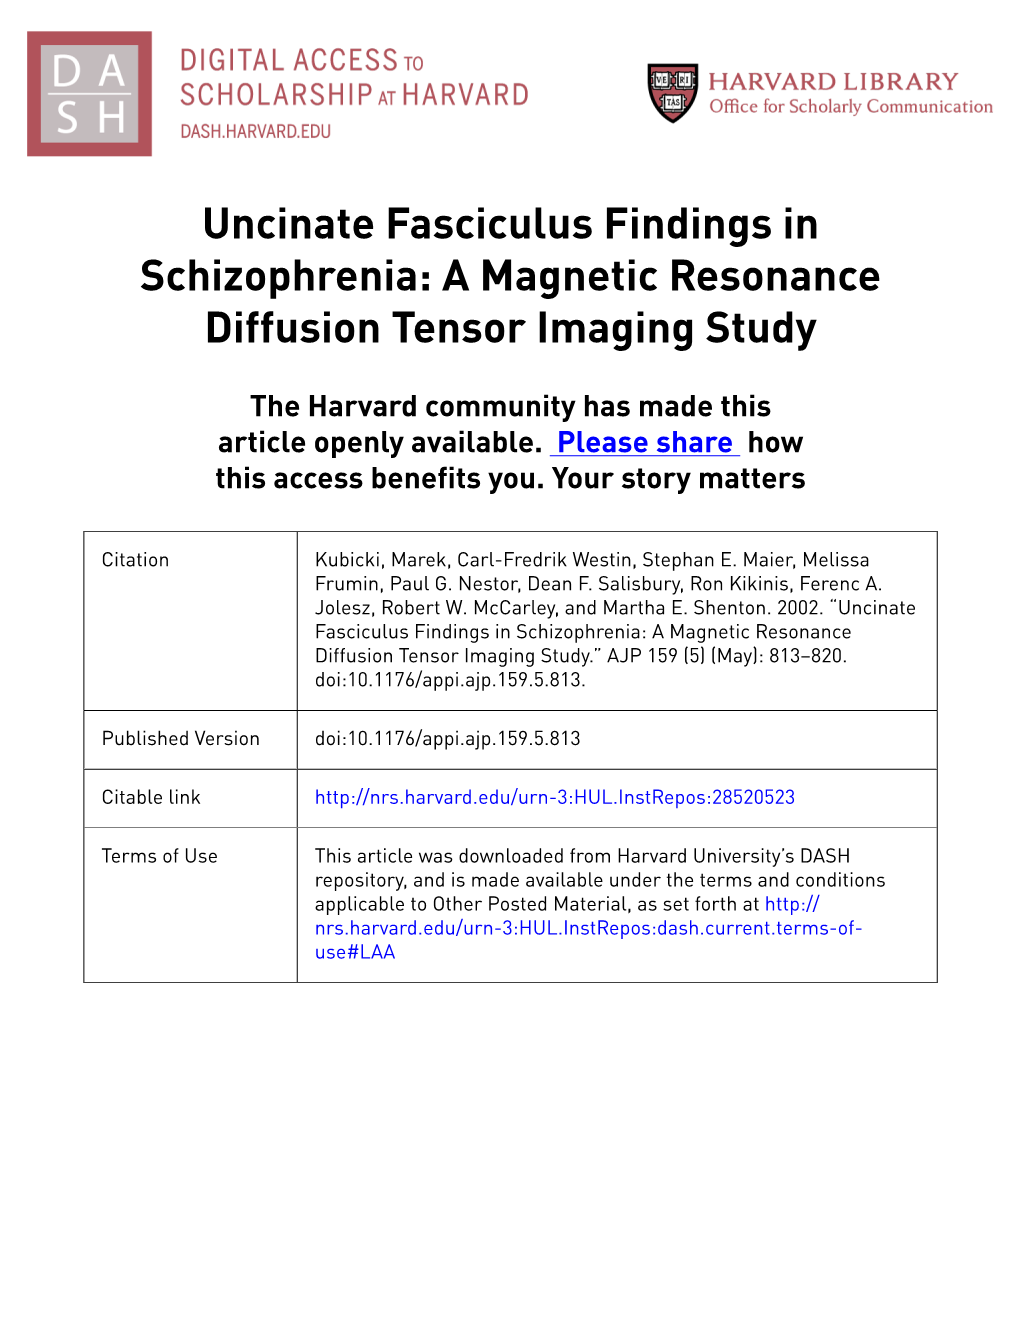 A Magnetic Resonance Diffusion Tensor Imaging Study